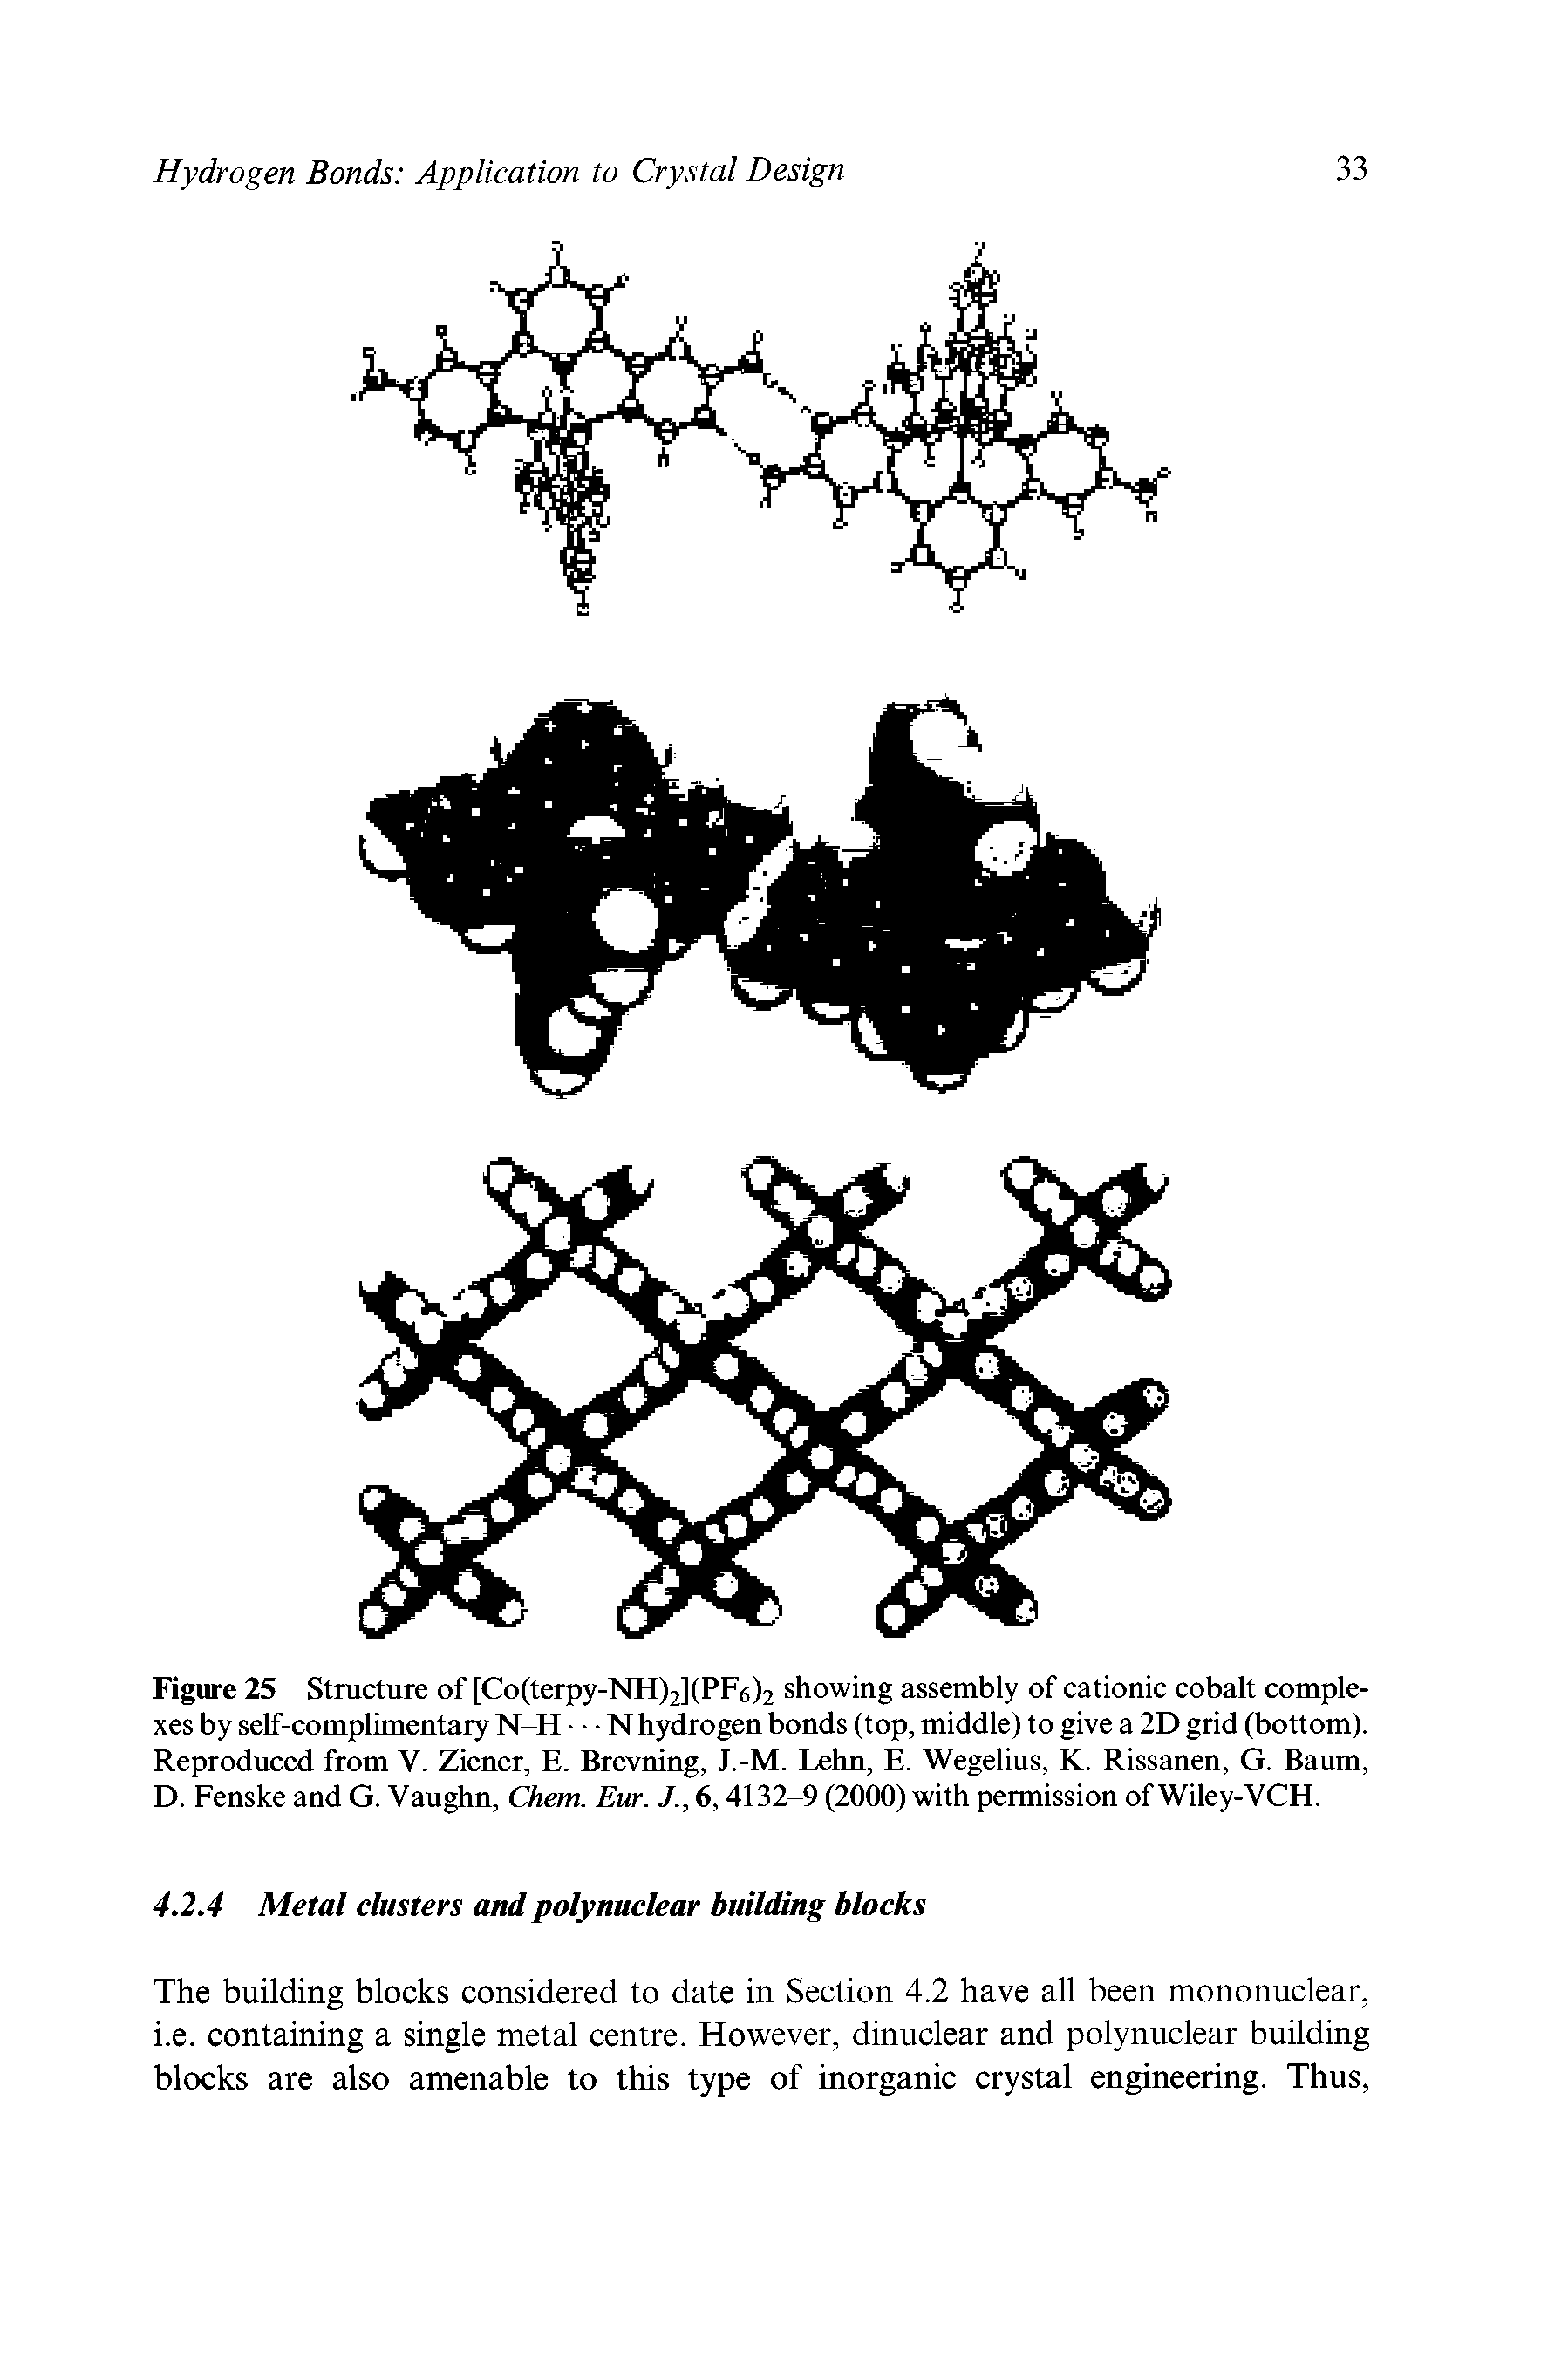 Figure 25 Structure of [Co(terpy-NH)2](PF6)2 showing assembly of cationic cobalt complexes by self-complimentary N-H N hydrogen bonds (top, middle) to give a 2D grid (bottom). Reproduced from V. Ziener, E. Brevning, J.-M. Lehn, E. Wegelius, K. Rissanen, G. Baum, D. Fenske and G. Vaughn, Chem. Eur../., 6,4132-9 (2000) with permission of Wiley-VCH.